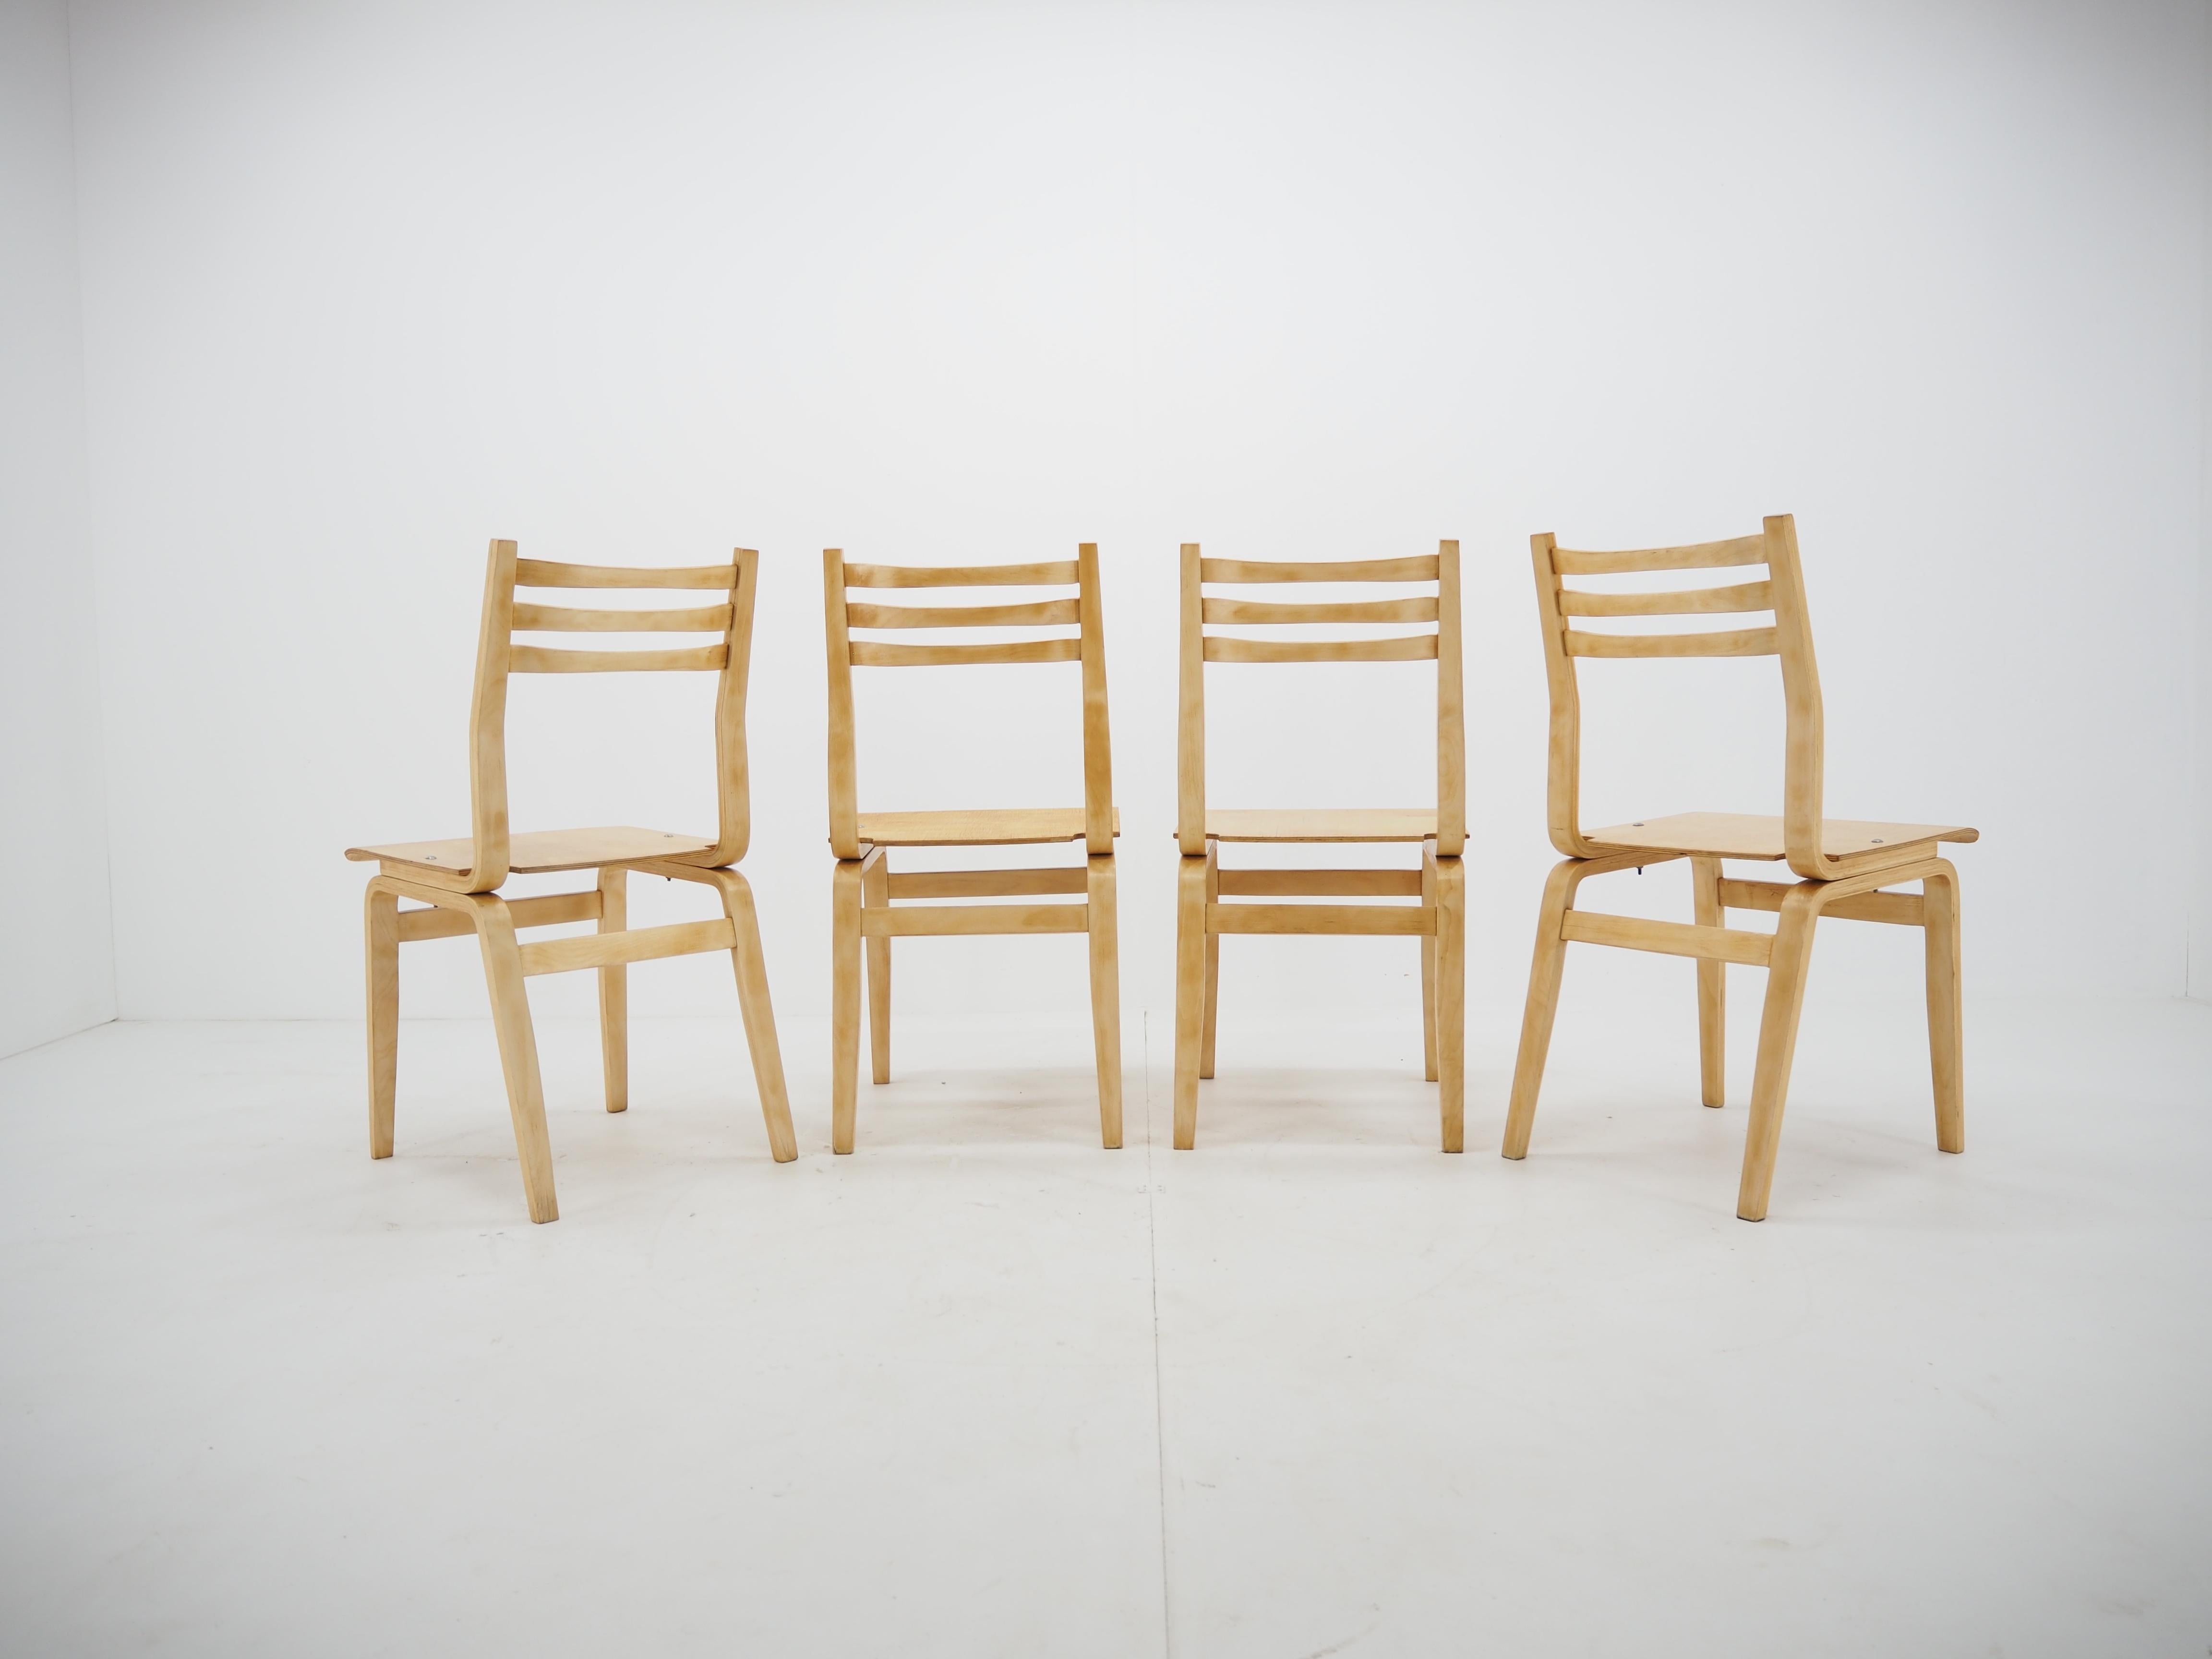 Late 20th Century Midcentury Set of 4 Wood Dining Room Chairs 1970s